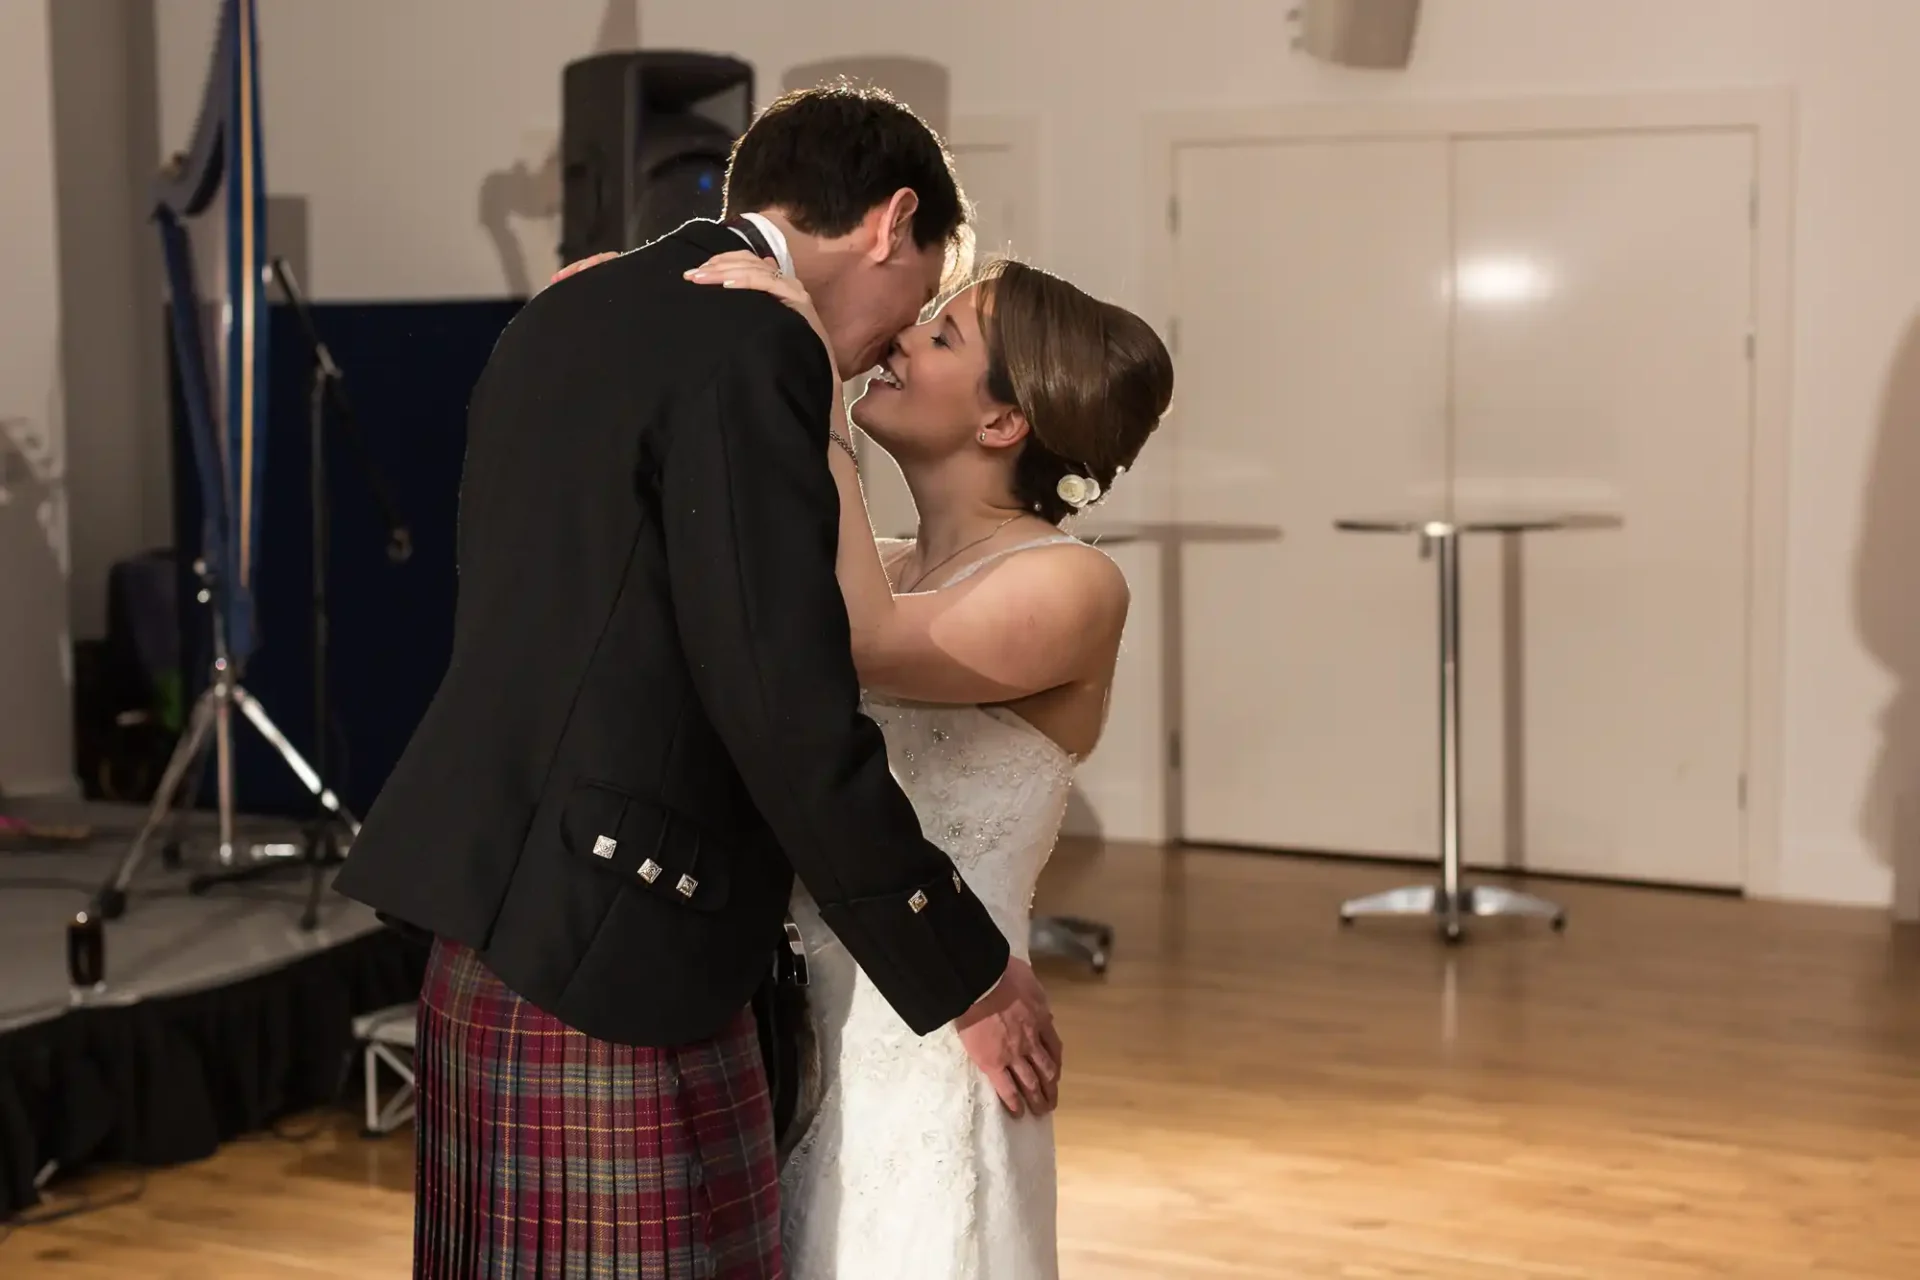 A bride and groom sharing a kiss on their wedding day, with the groom wearing a kilt and the bride in a white gown, in a room with musical equipment in the background.